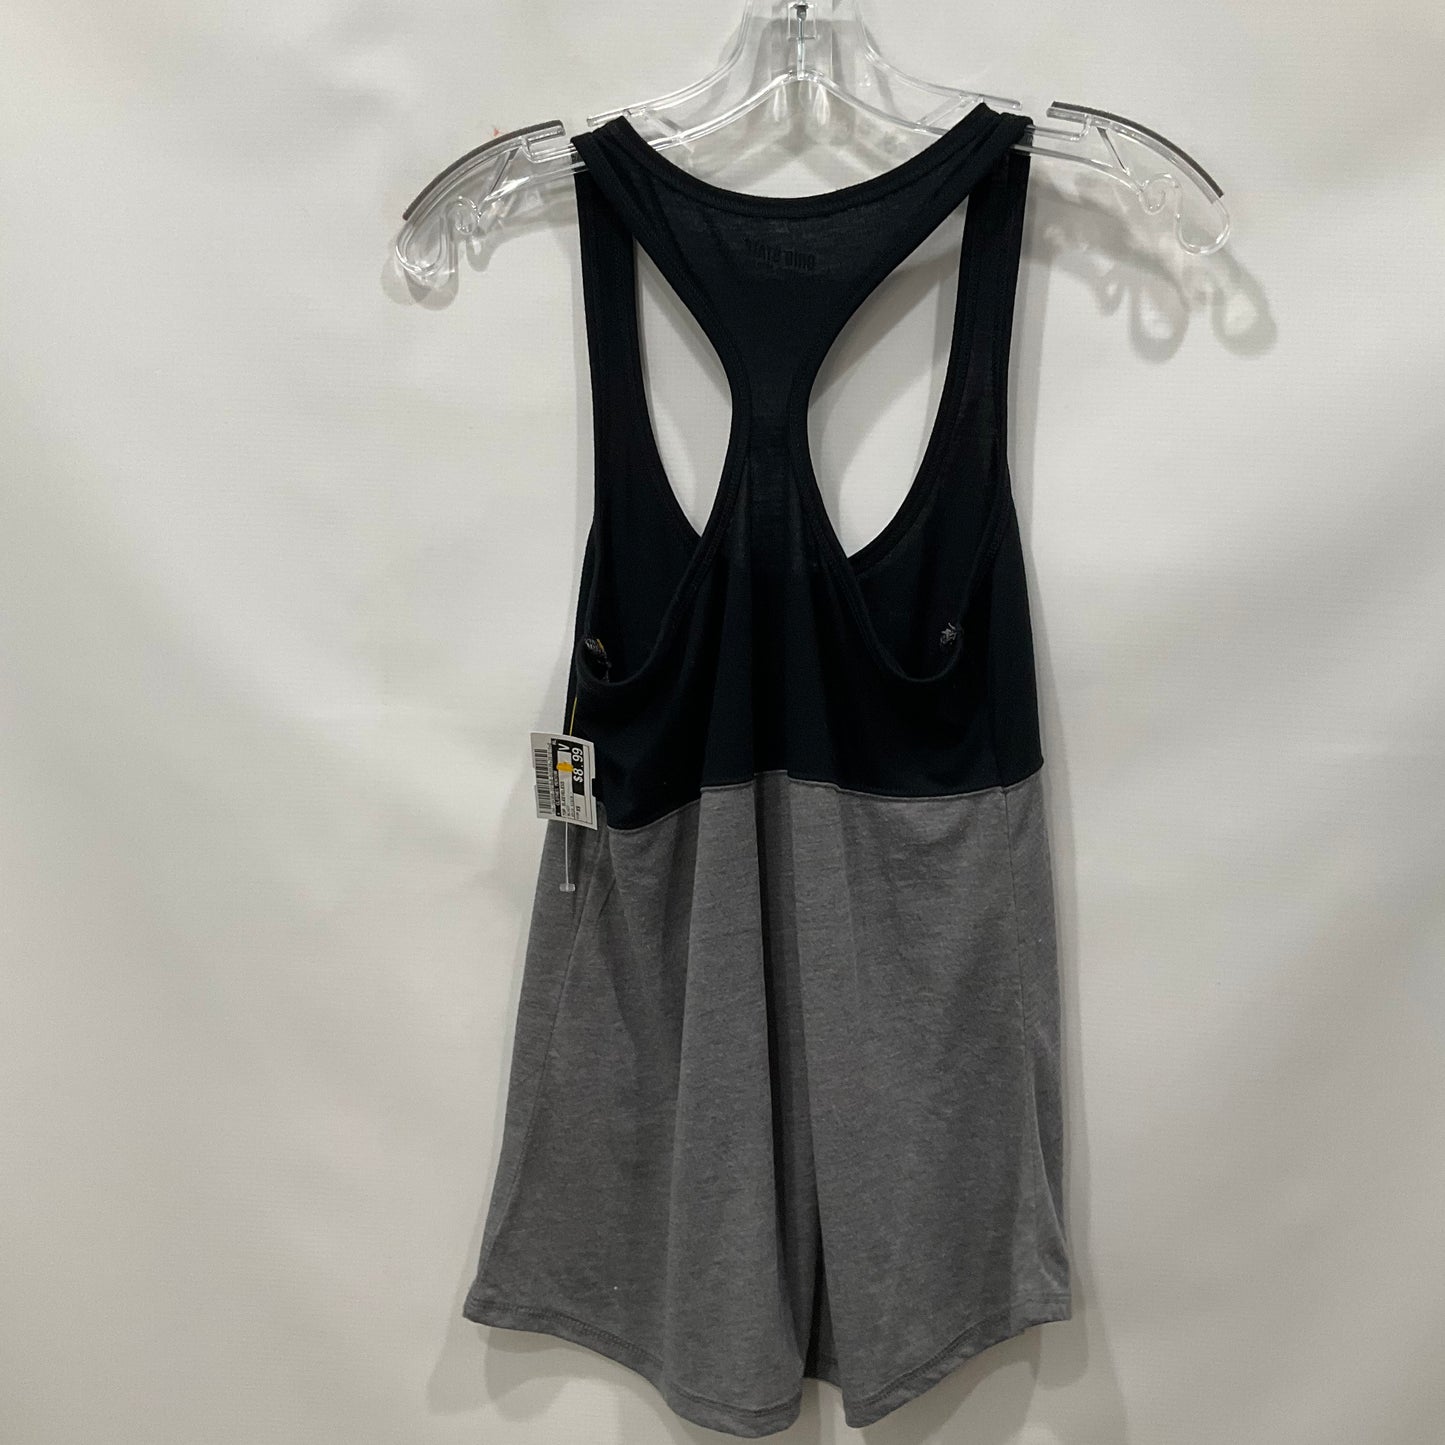 Top Sleeveless By ohio state   Size: Xs